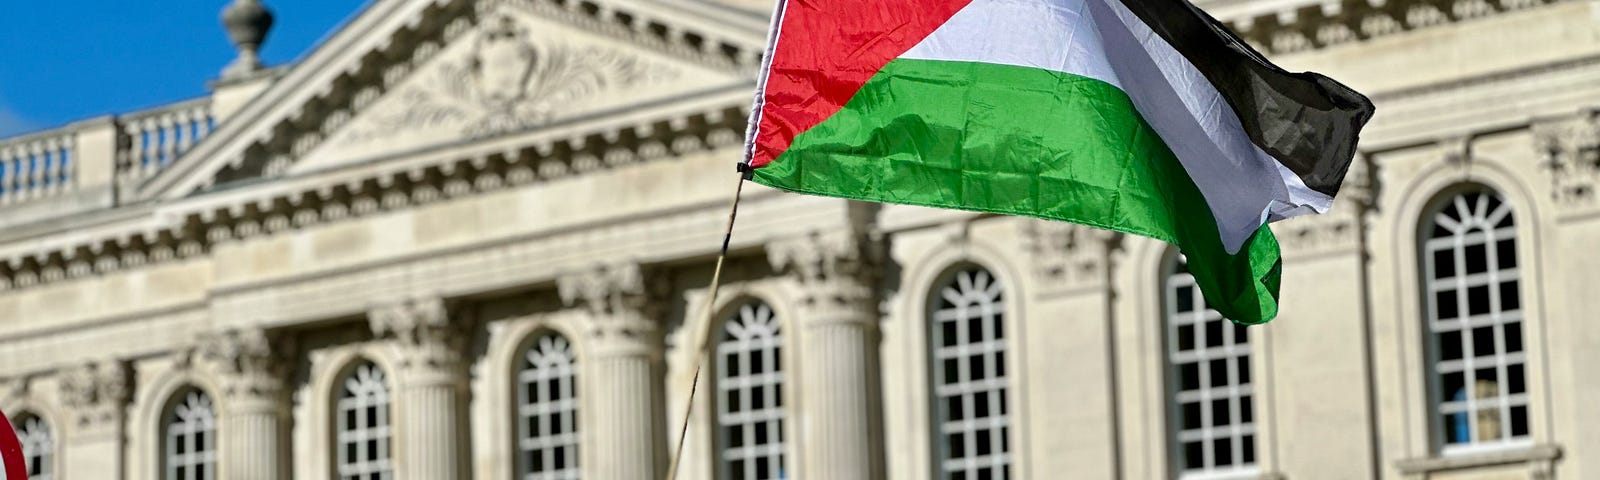 Palestinian flag, boy, protest march, government building